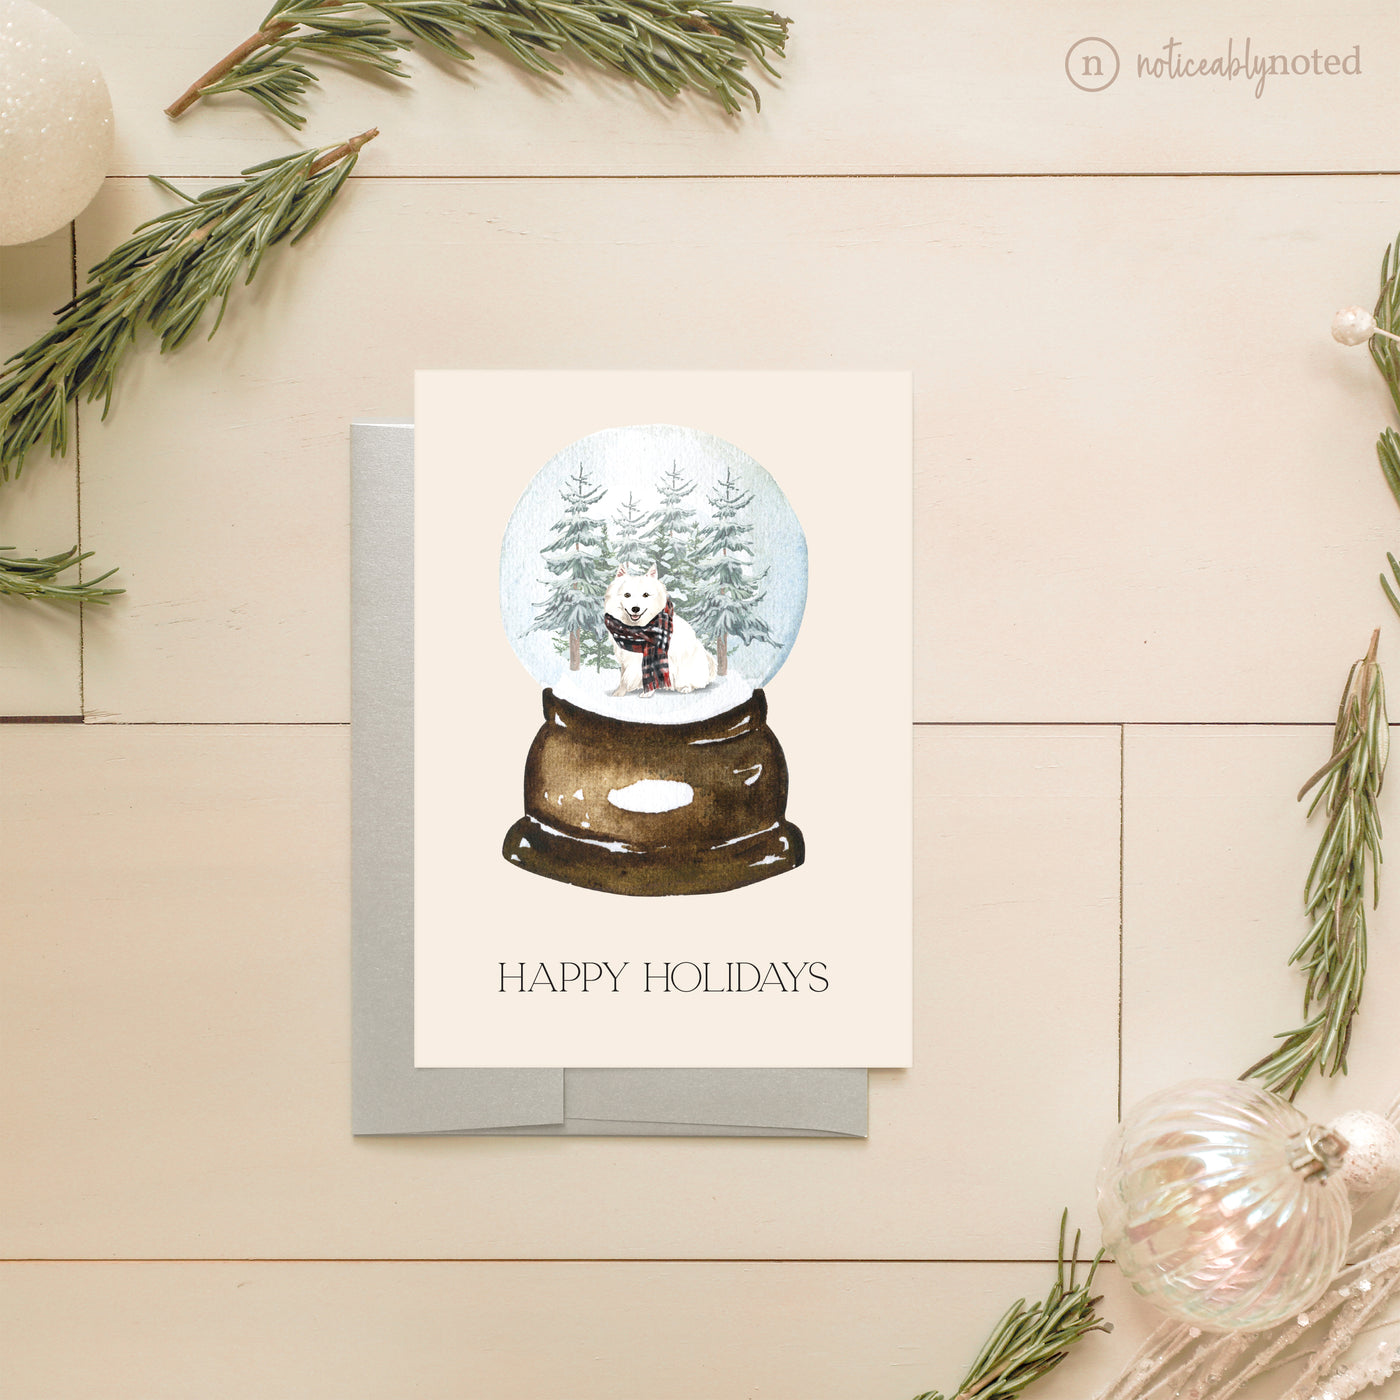 Japanese Spitz Dog Holiday Greeting Cards | Noticeably Noted